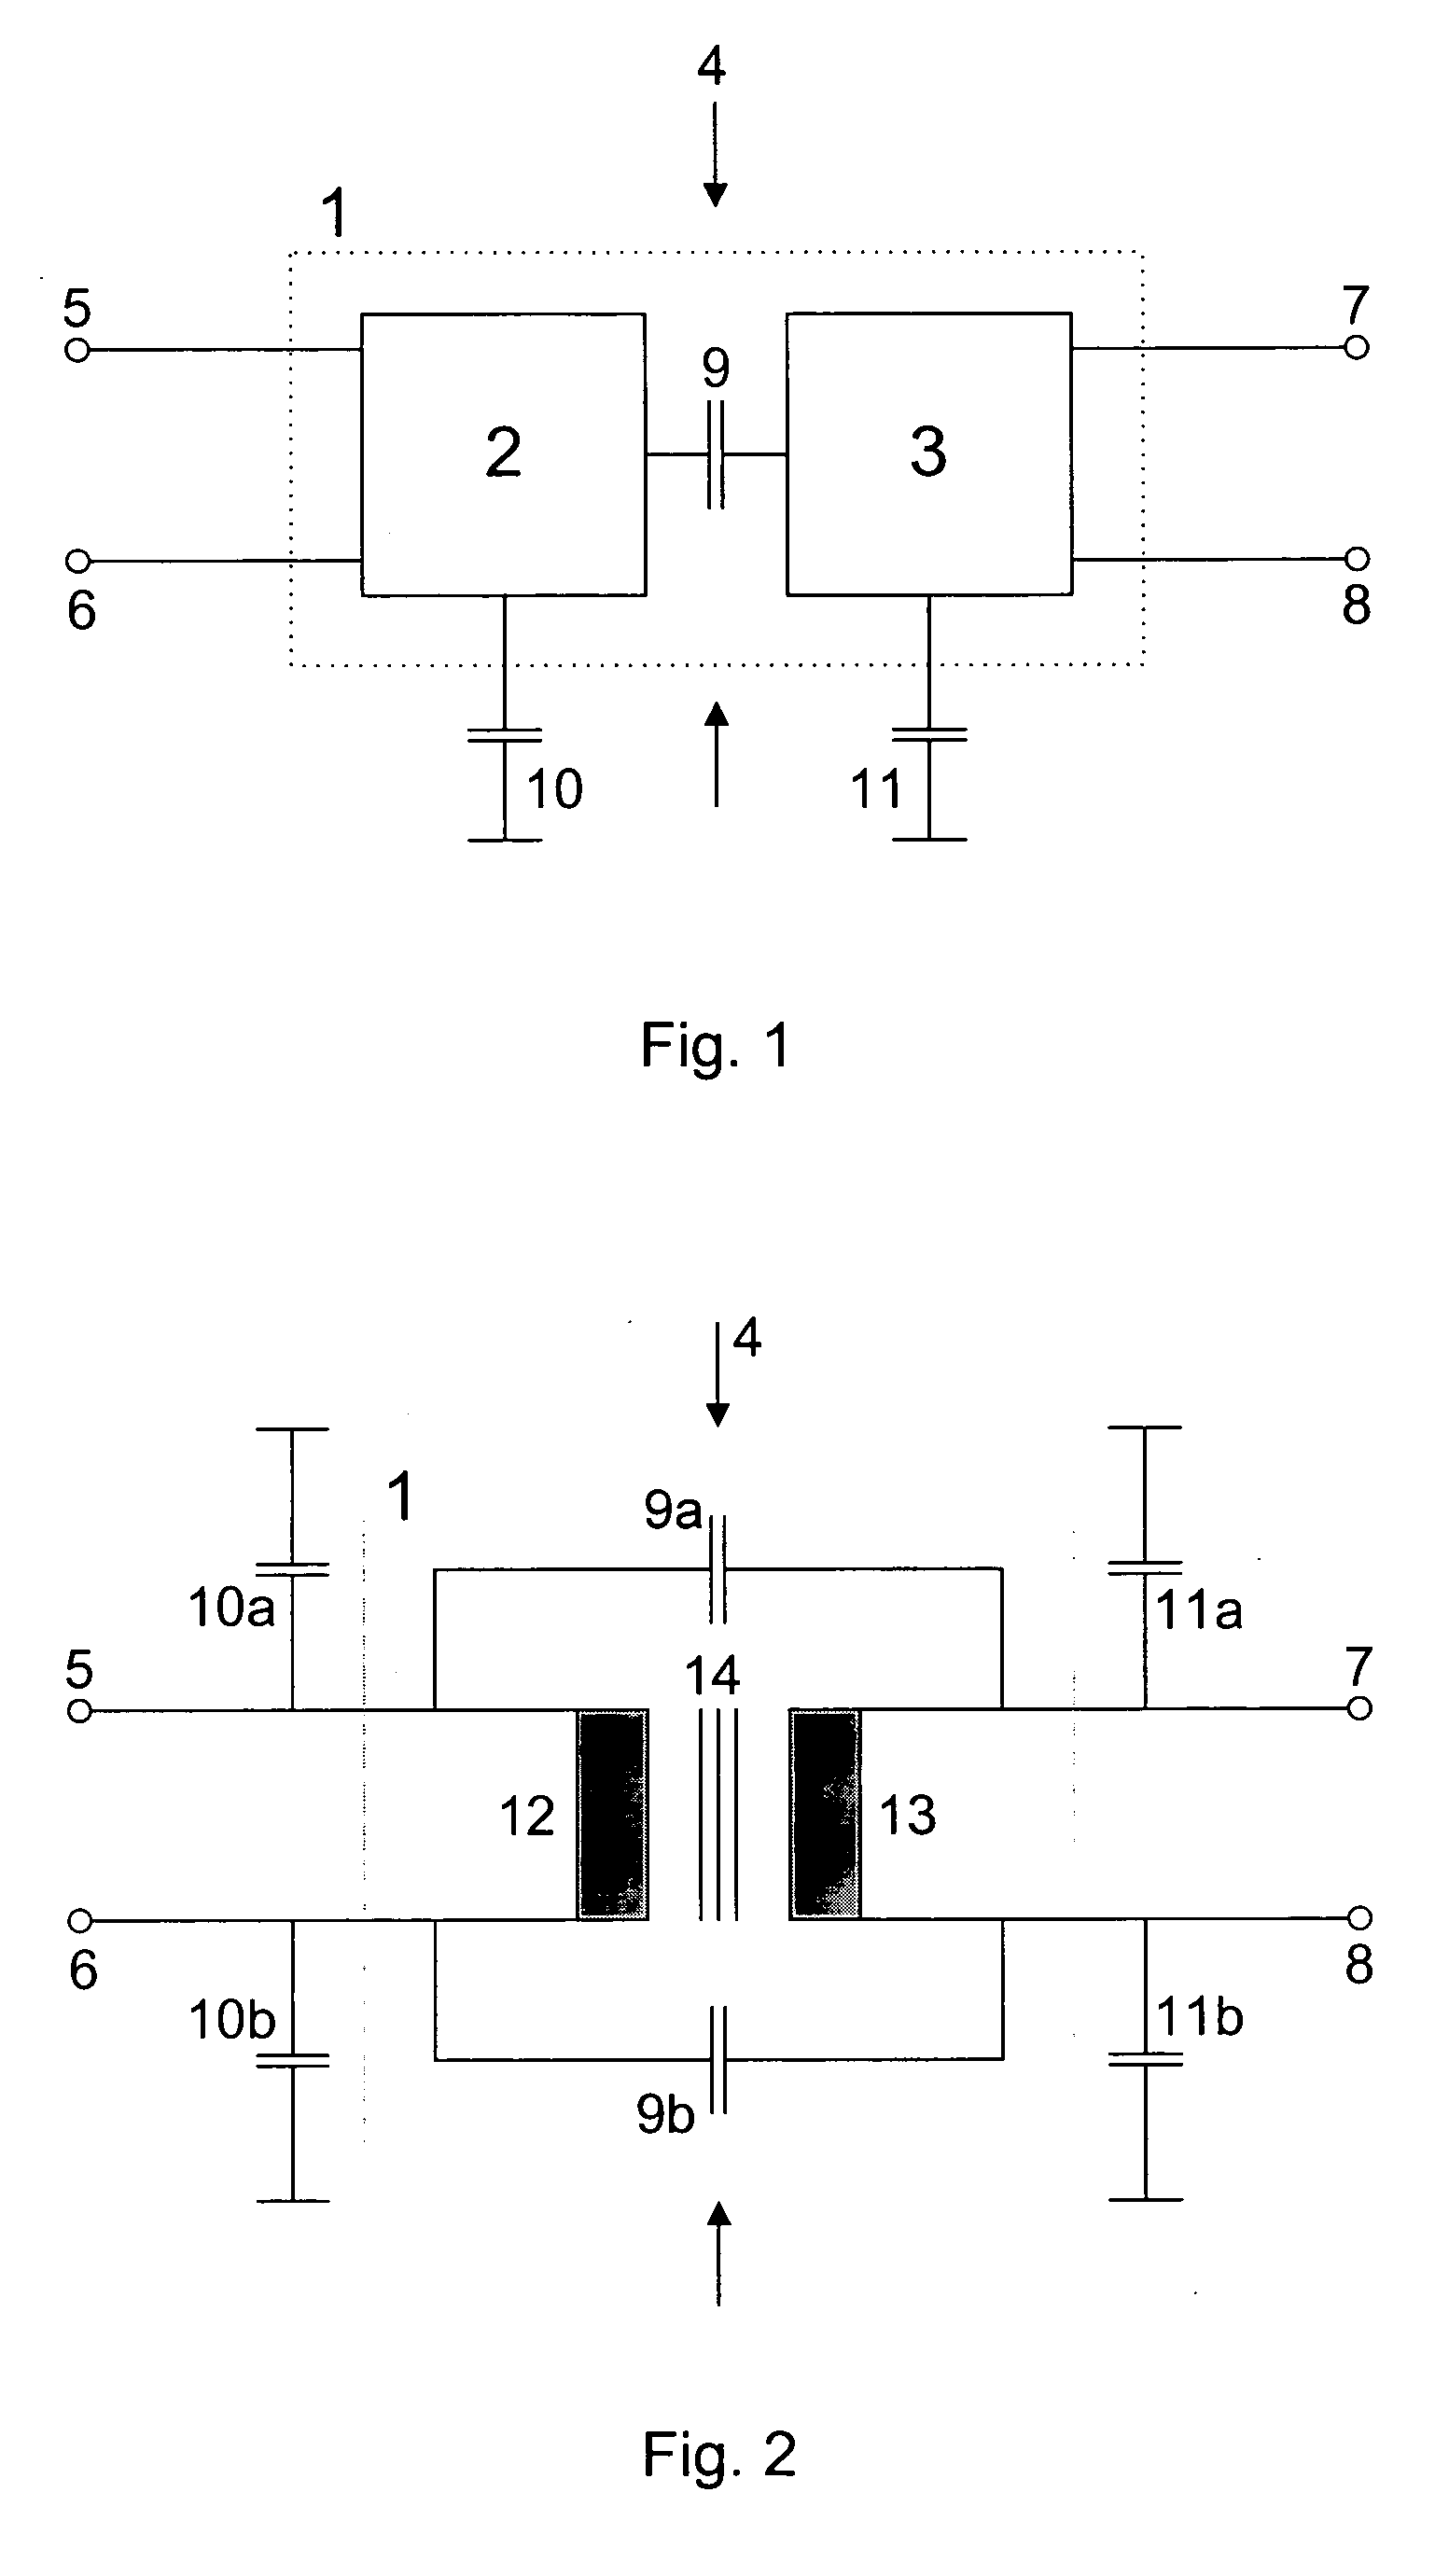 Method and apparatus for isolated transformation of a first voltage into a second voltage for measurement of electrical bioimpedances or bioconductances